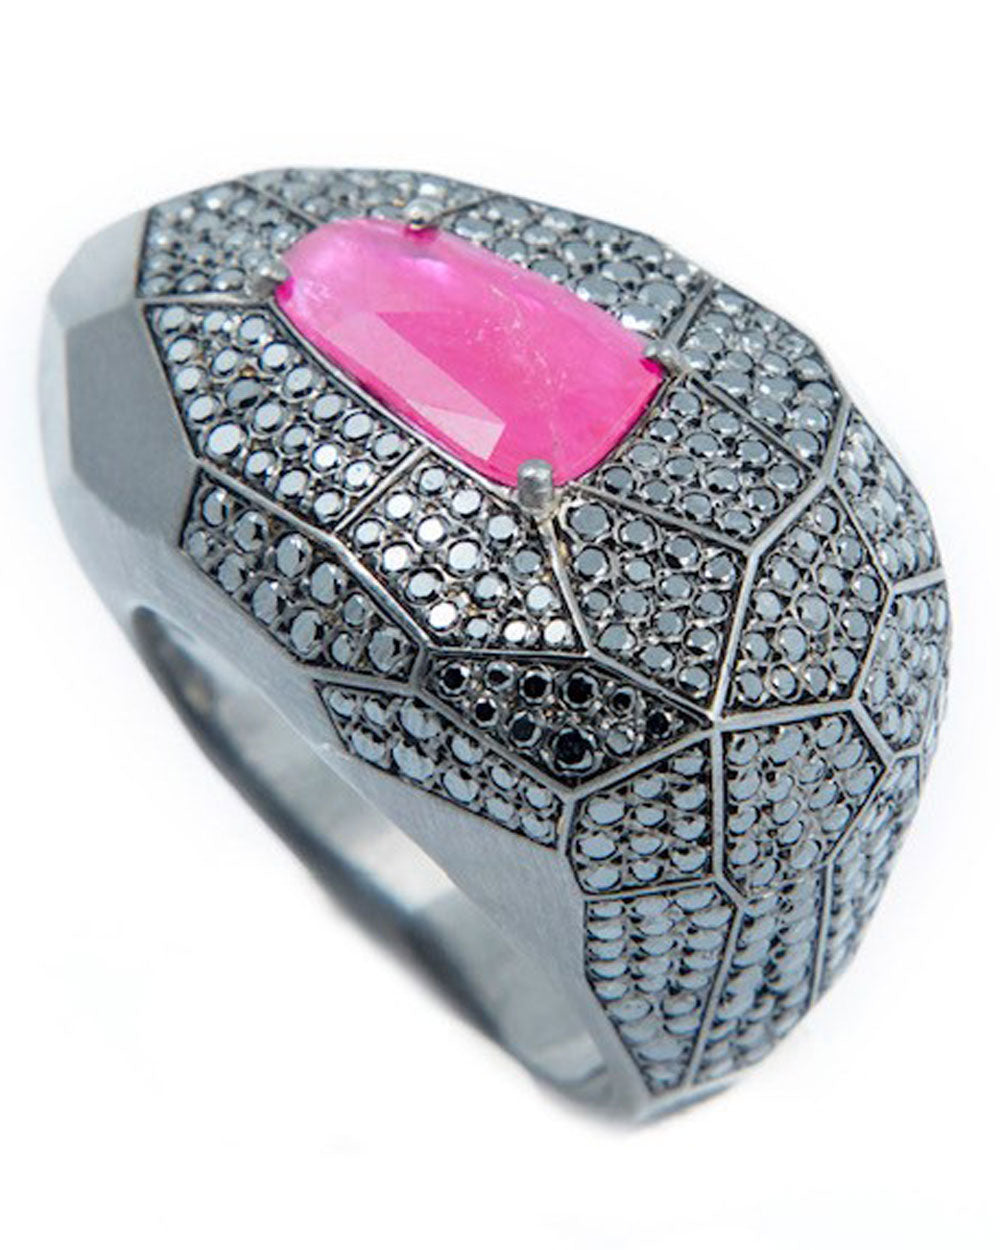 Ruby and Black Diamond Facet Collection Ring